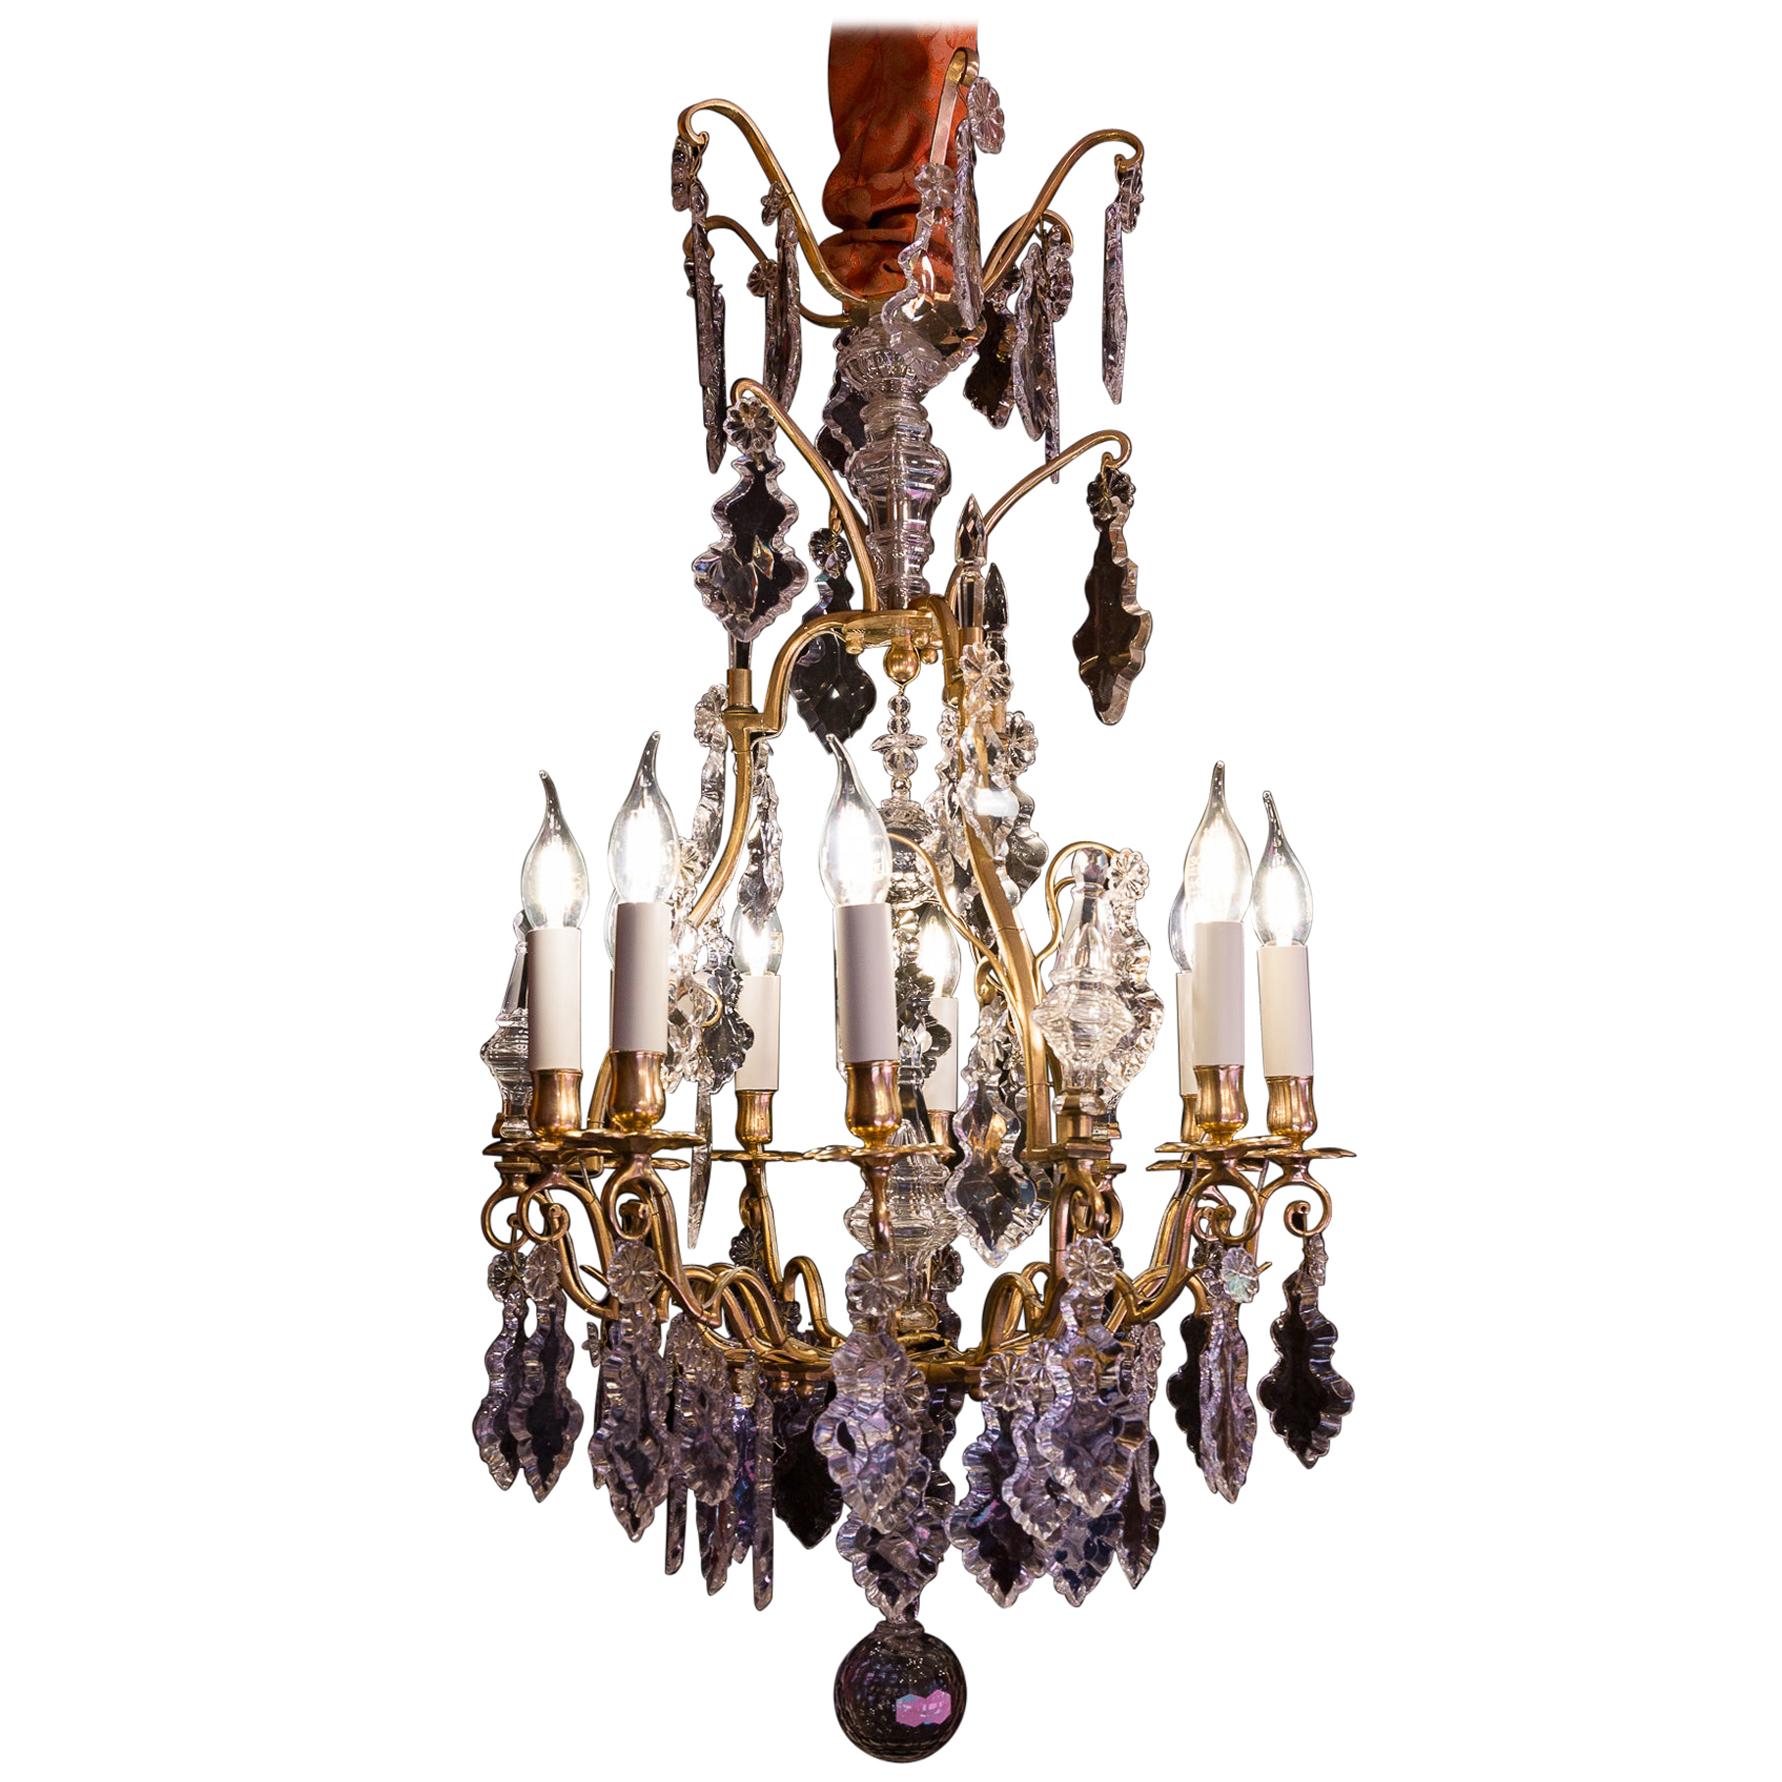 French Louis XV Style Gilt-Bronze and Baccarat Cut Crystal Chandelier circa 1880